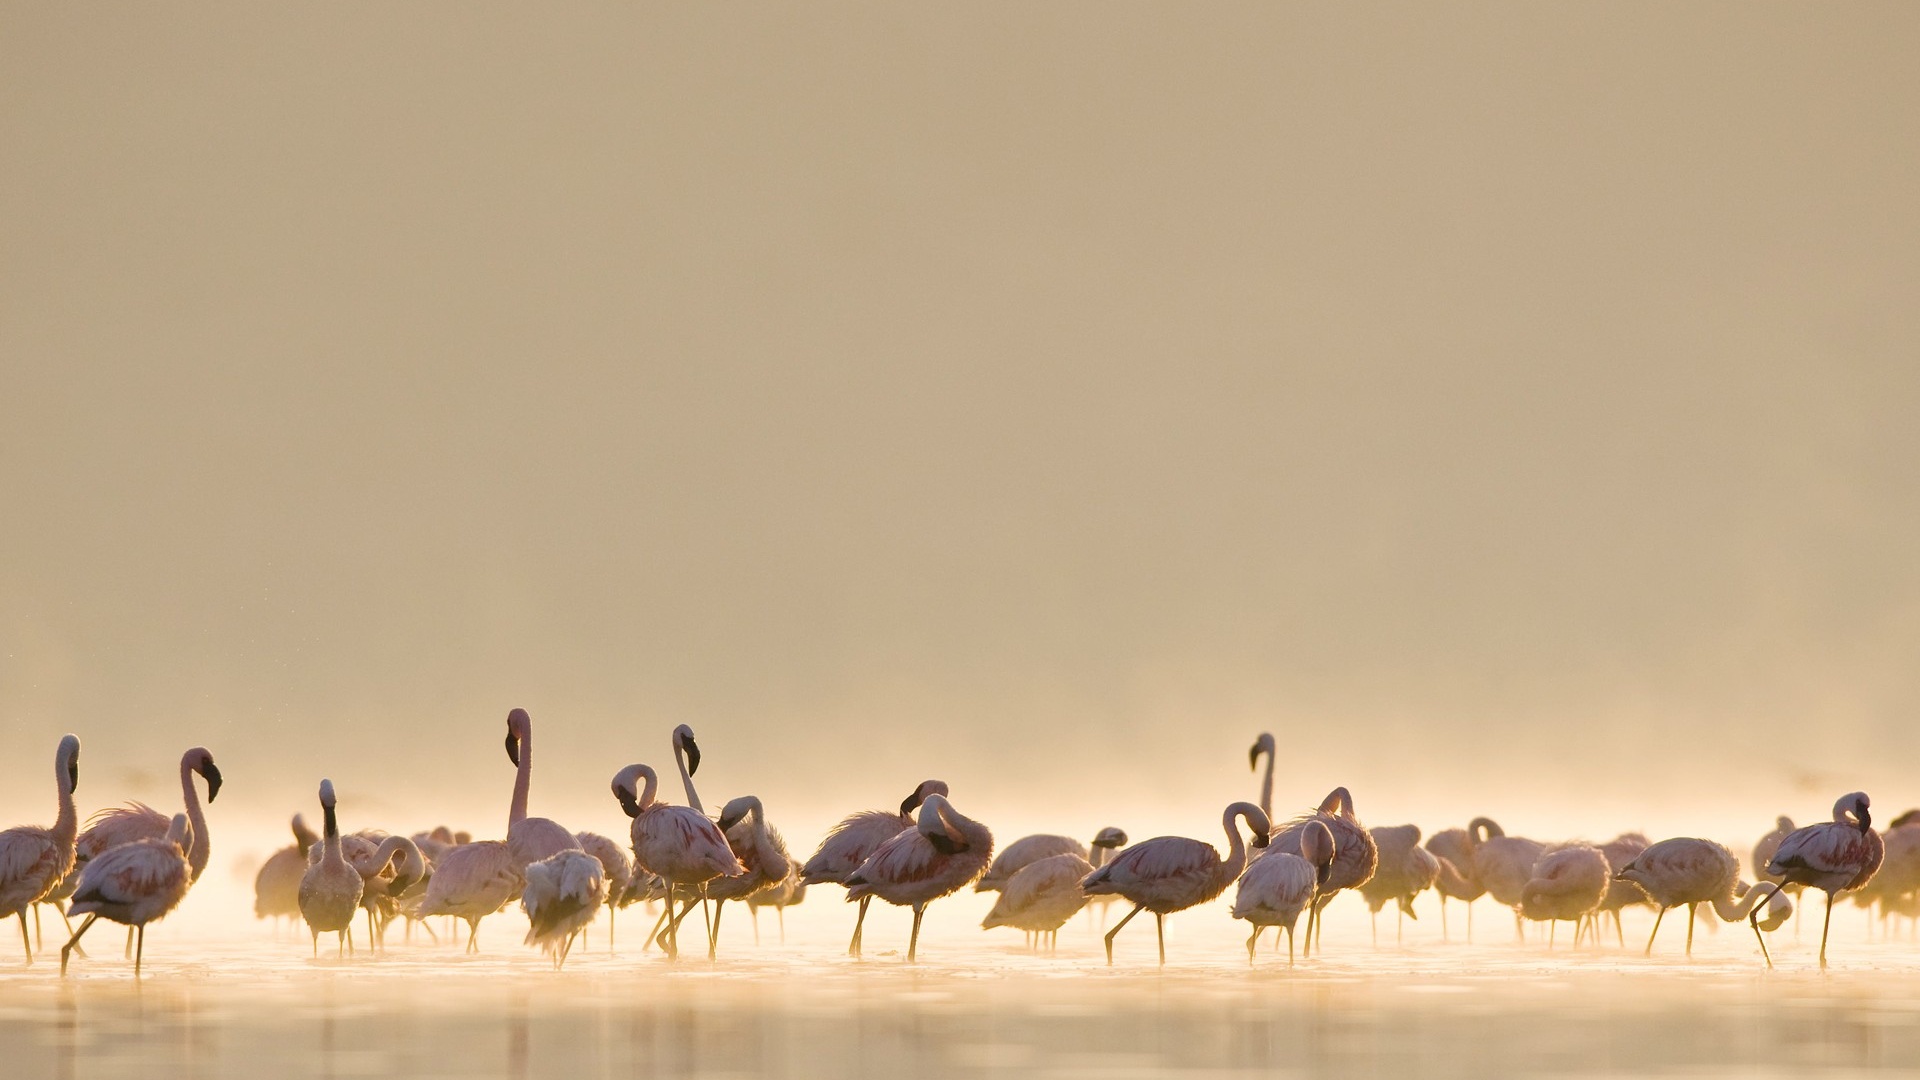 A flock of flamingos stand in the water. - Flamingo